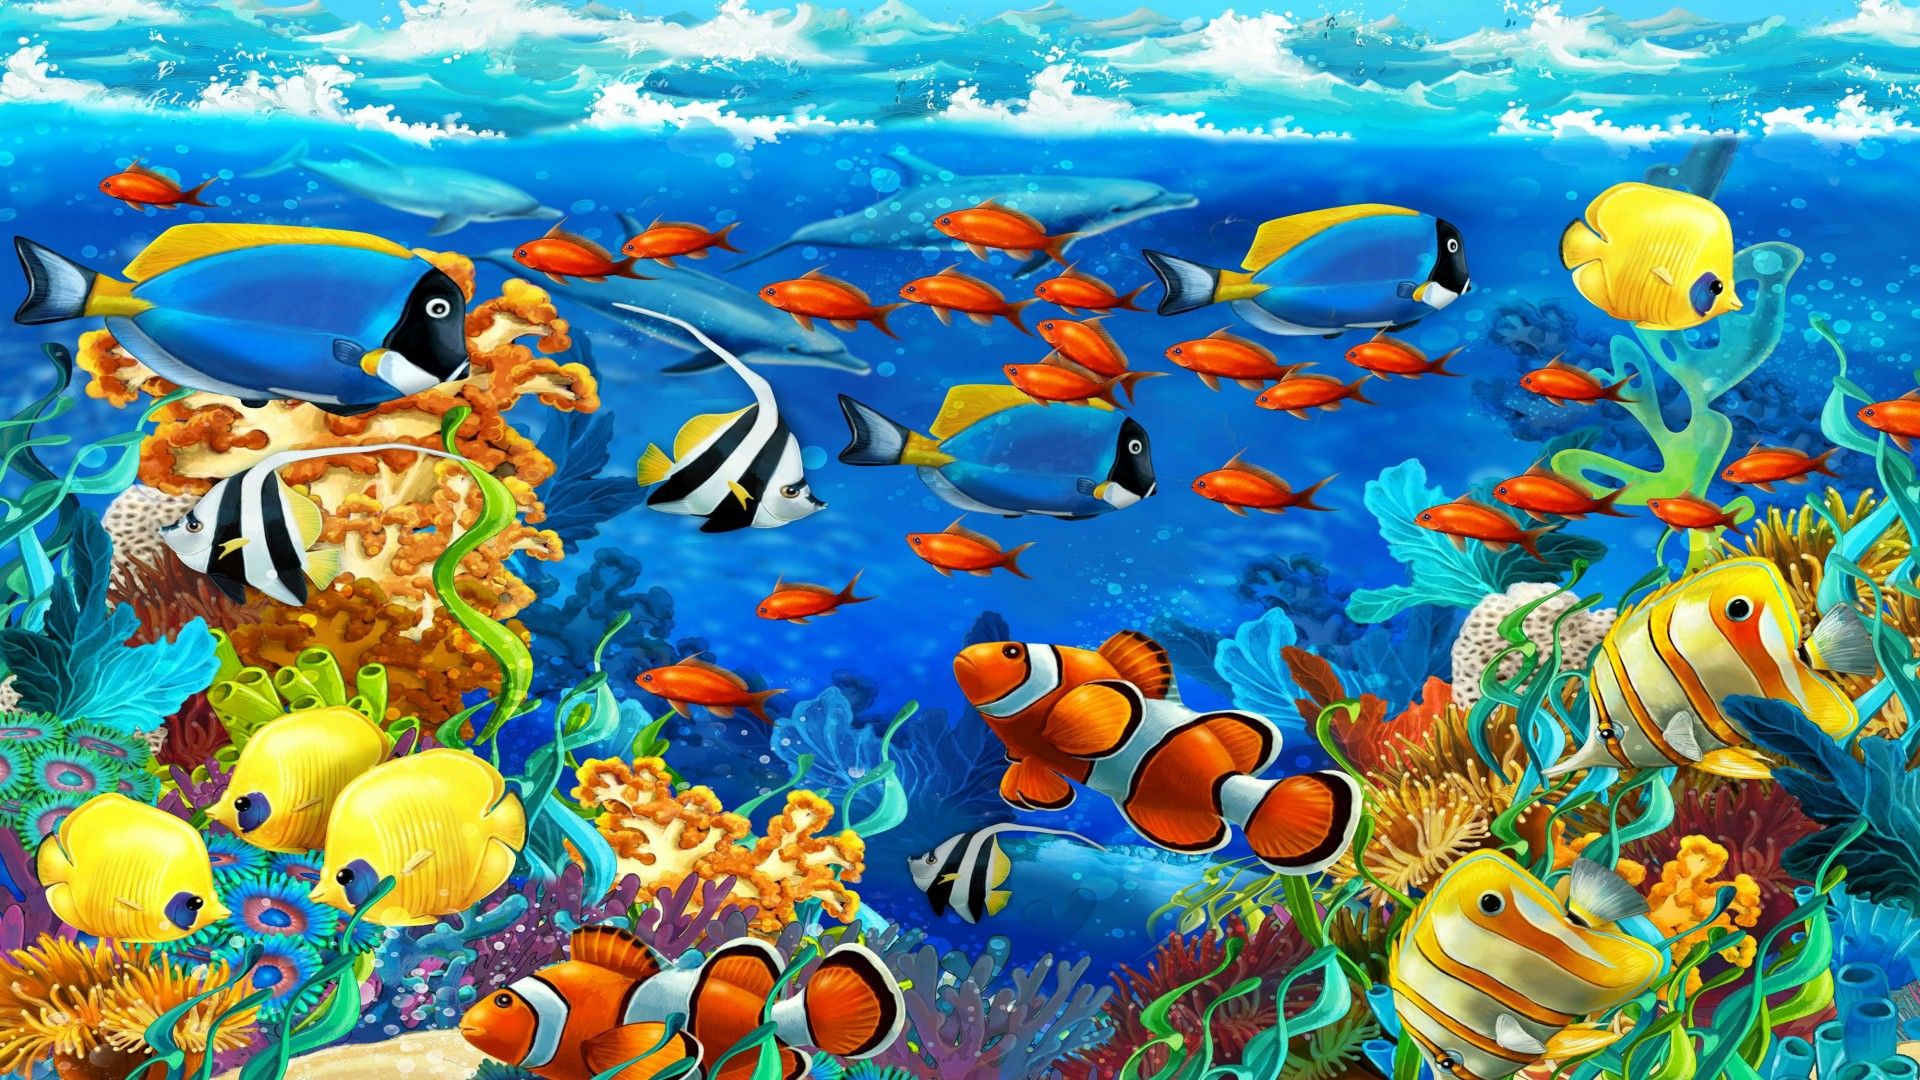 Sea Underwater World, Coral, Exotic Tropical Fish Wallpaper For Mobile Phone And Laptop, Wallpaper13.com